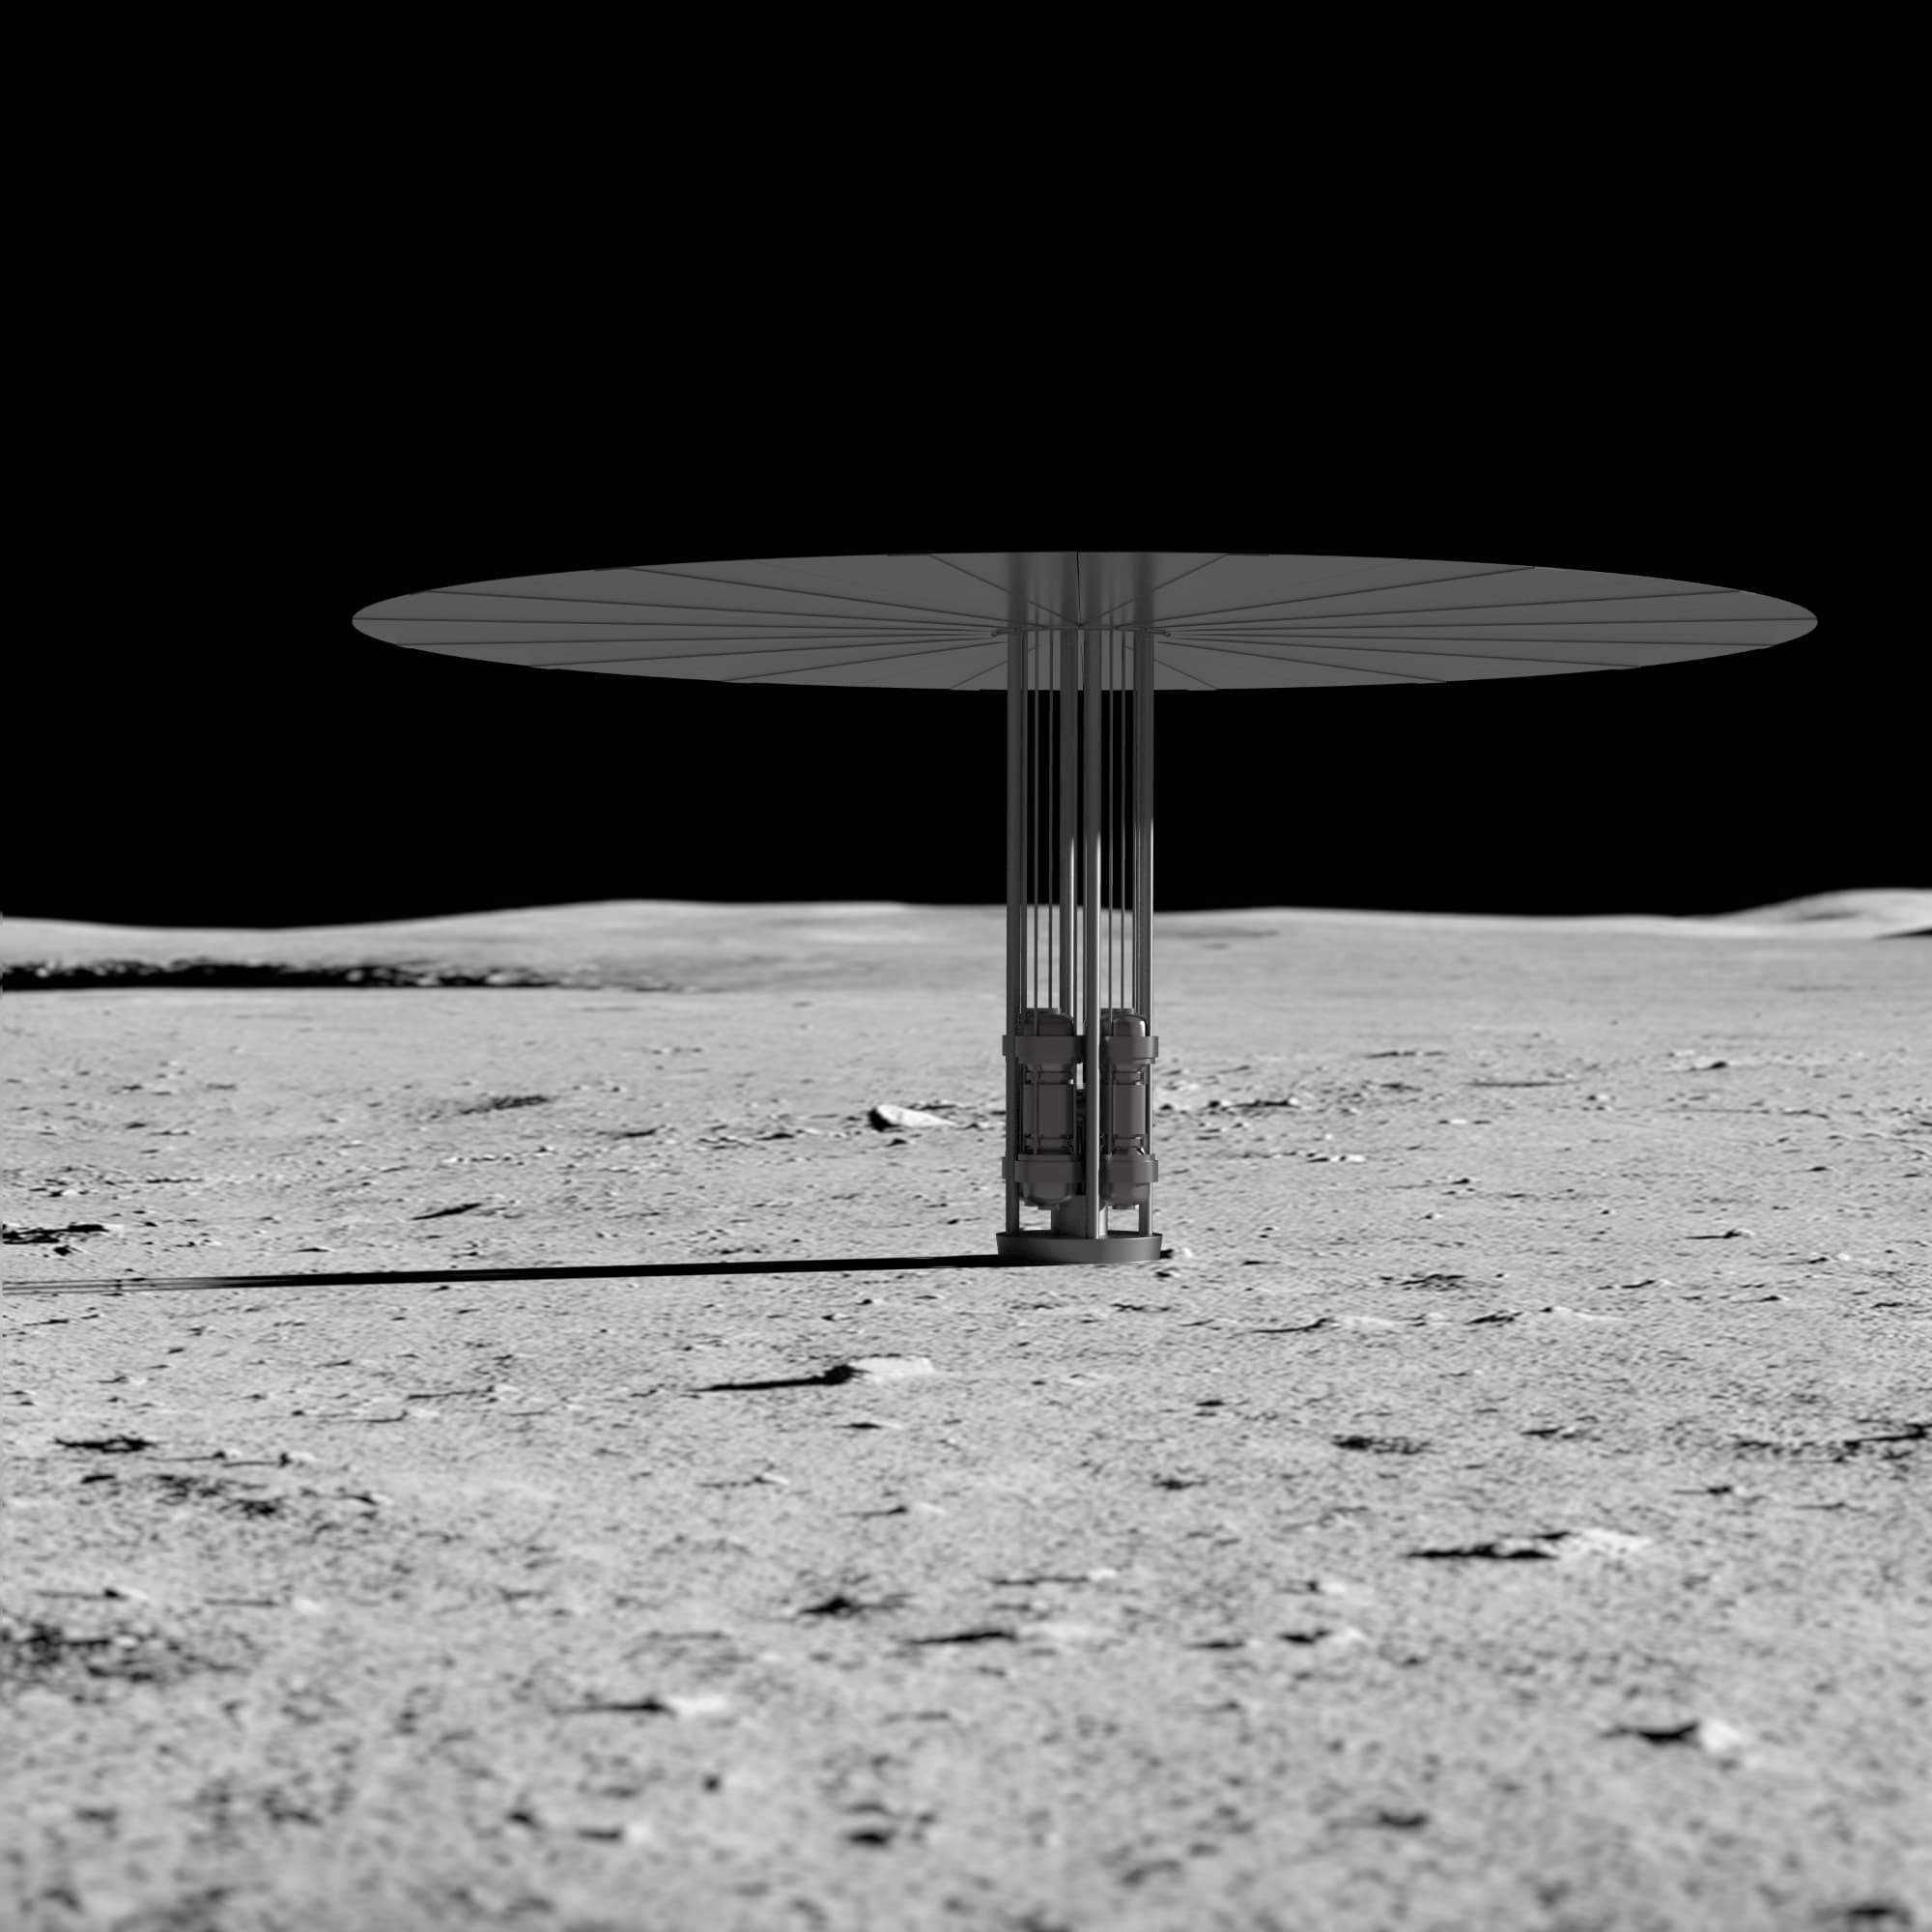 NASA's Kilopower Nuclear Reactor Could Enable permanent Human Settlement on the Moon and Mars